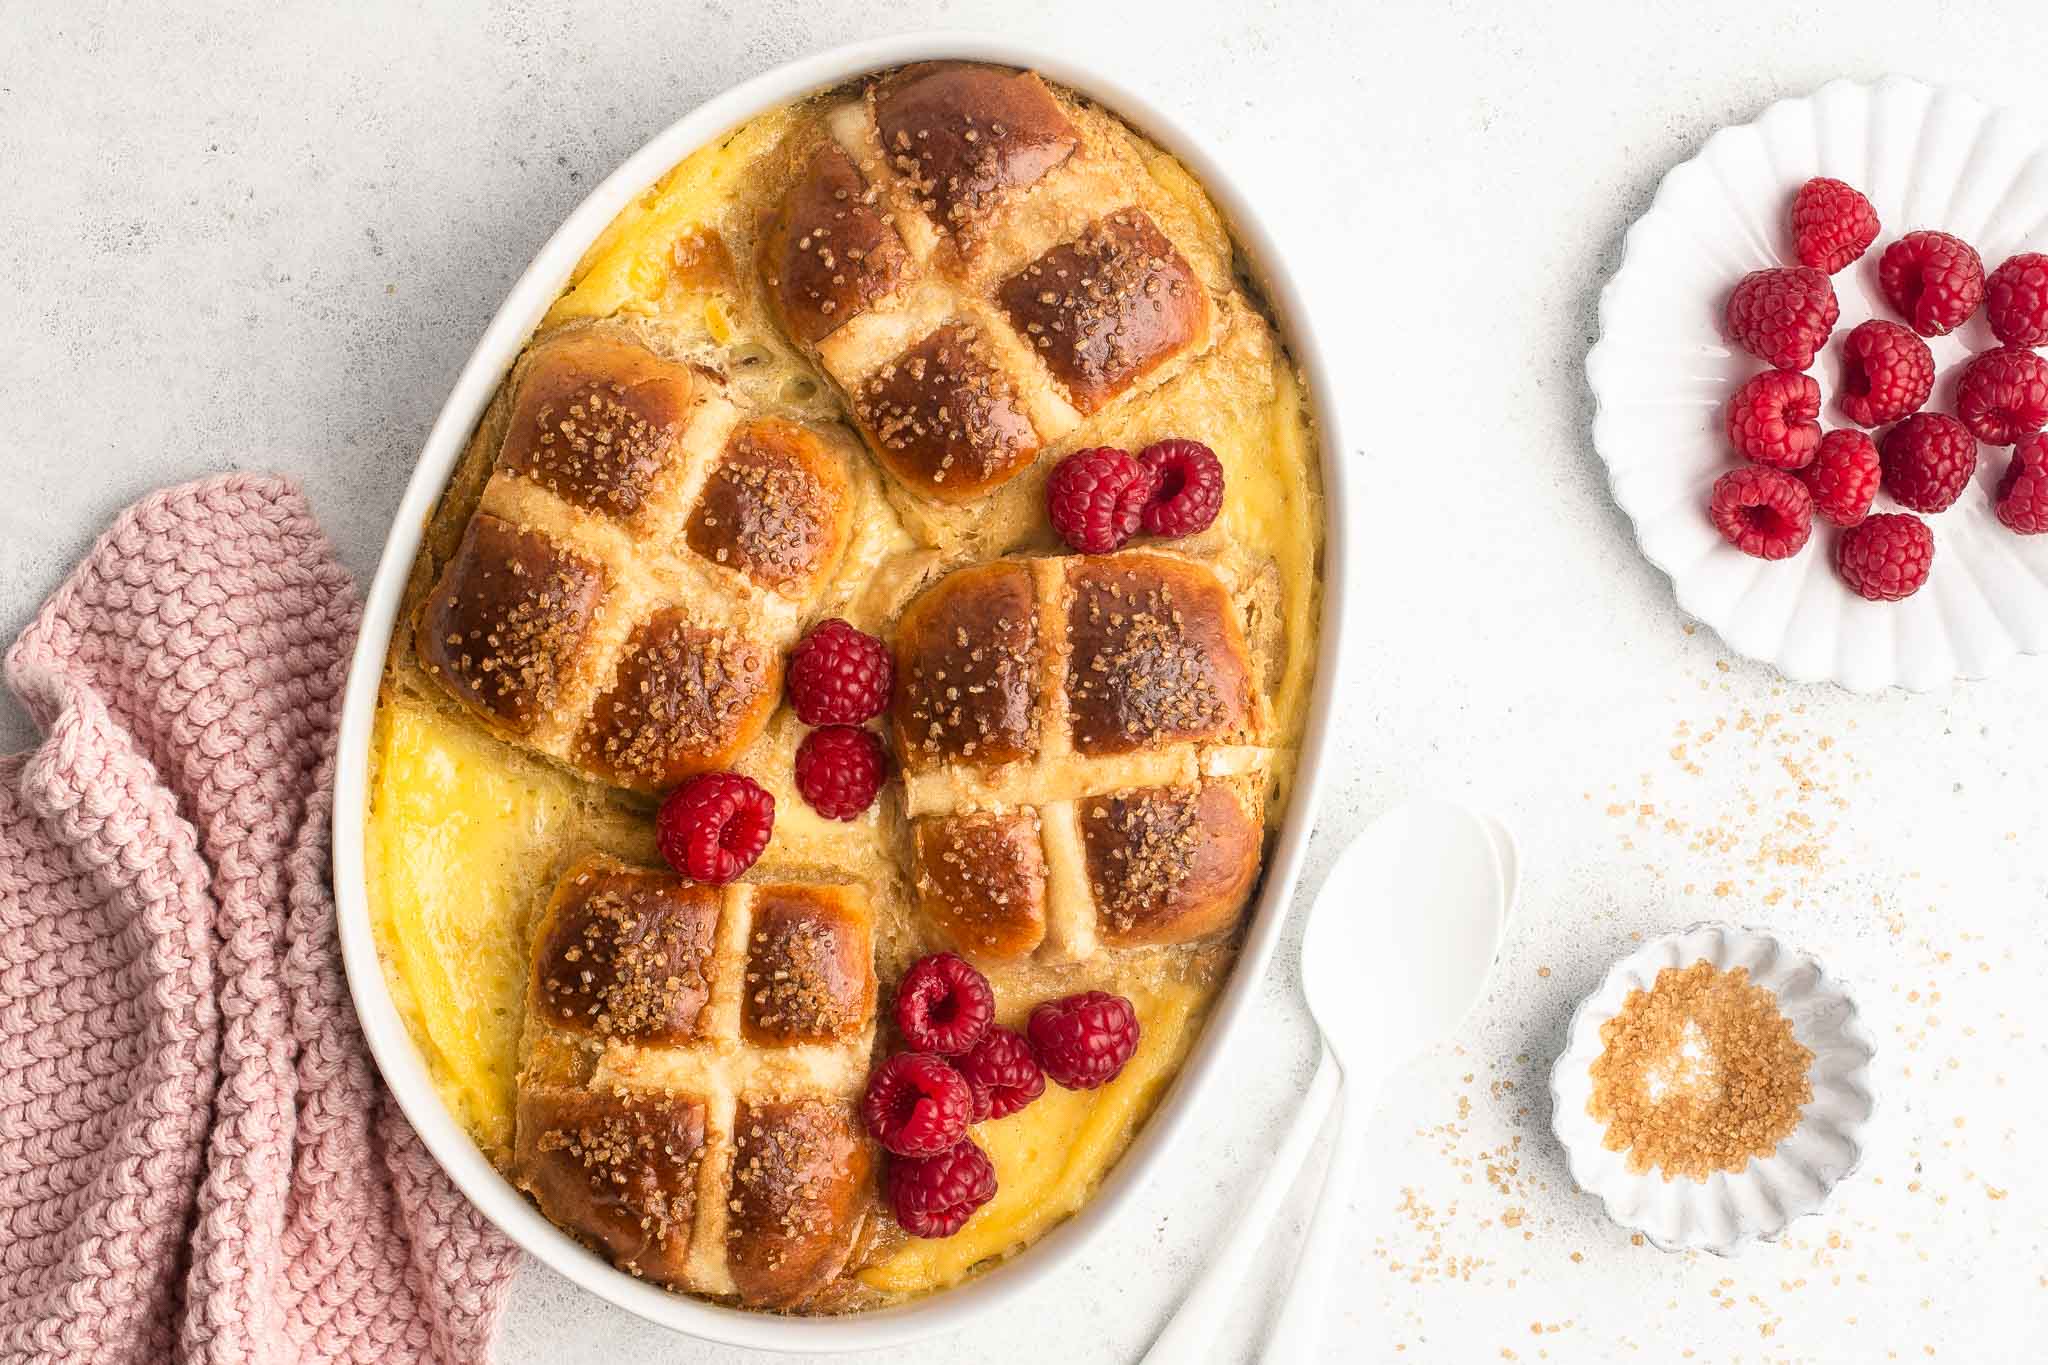 hot cross bun bread and butter pudding in white dish with raspberries